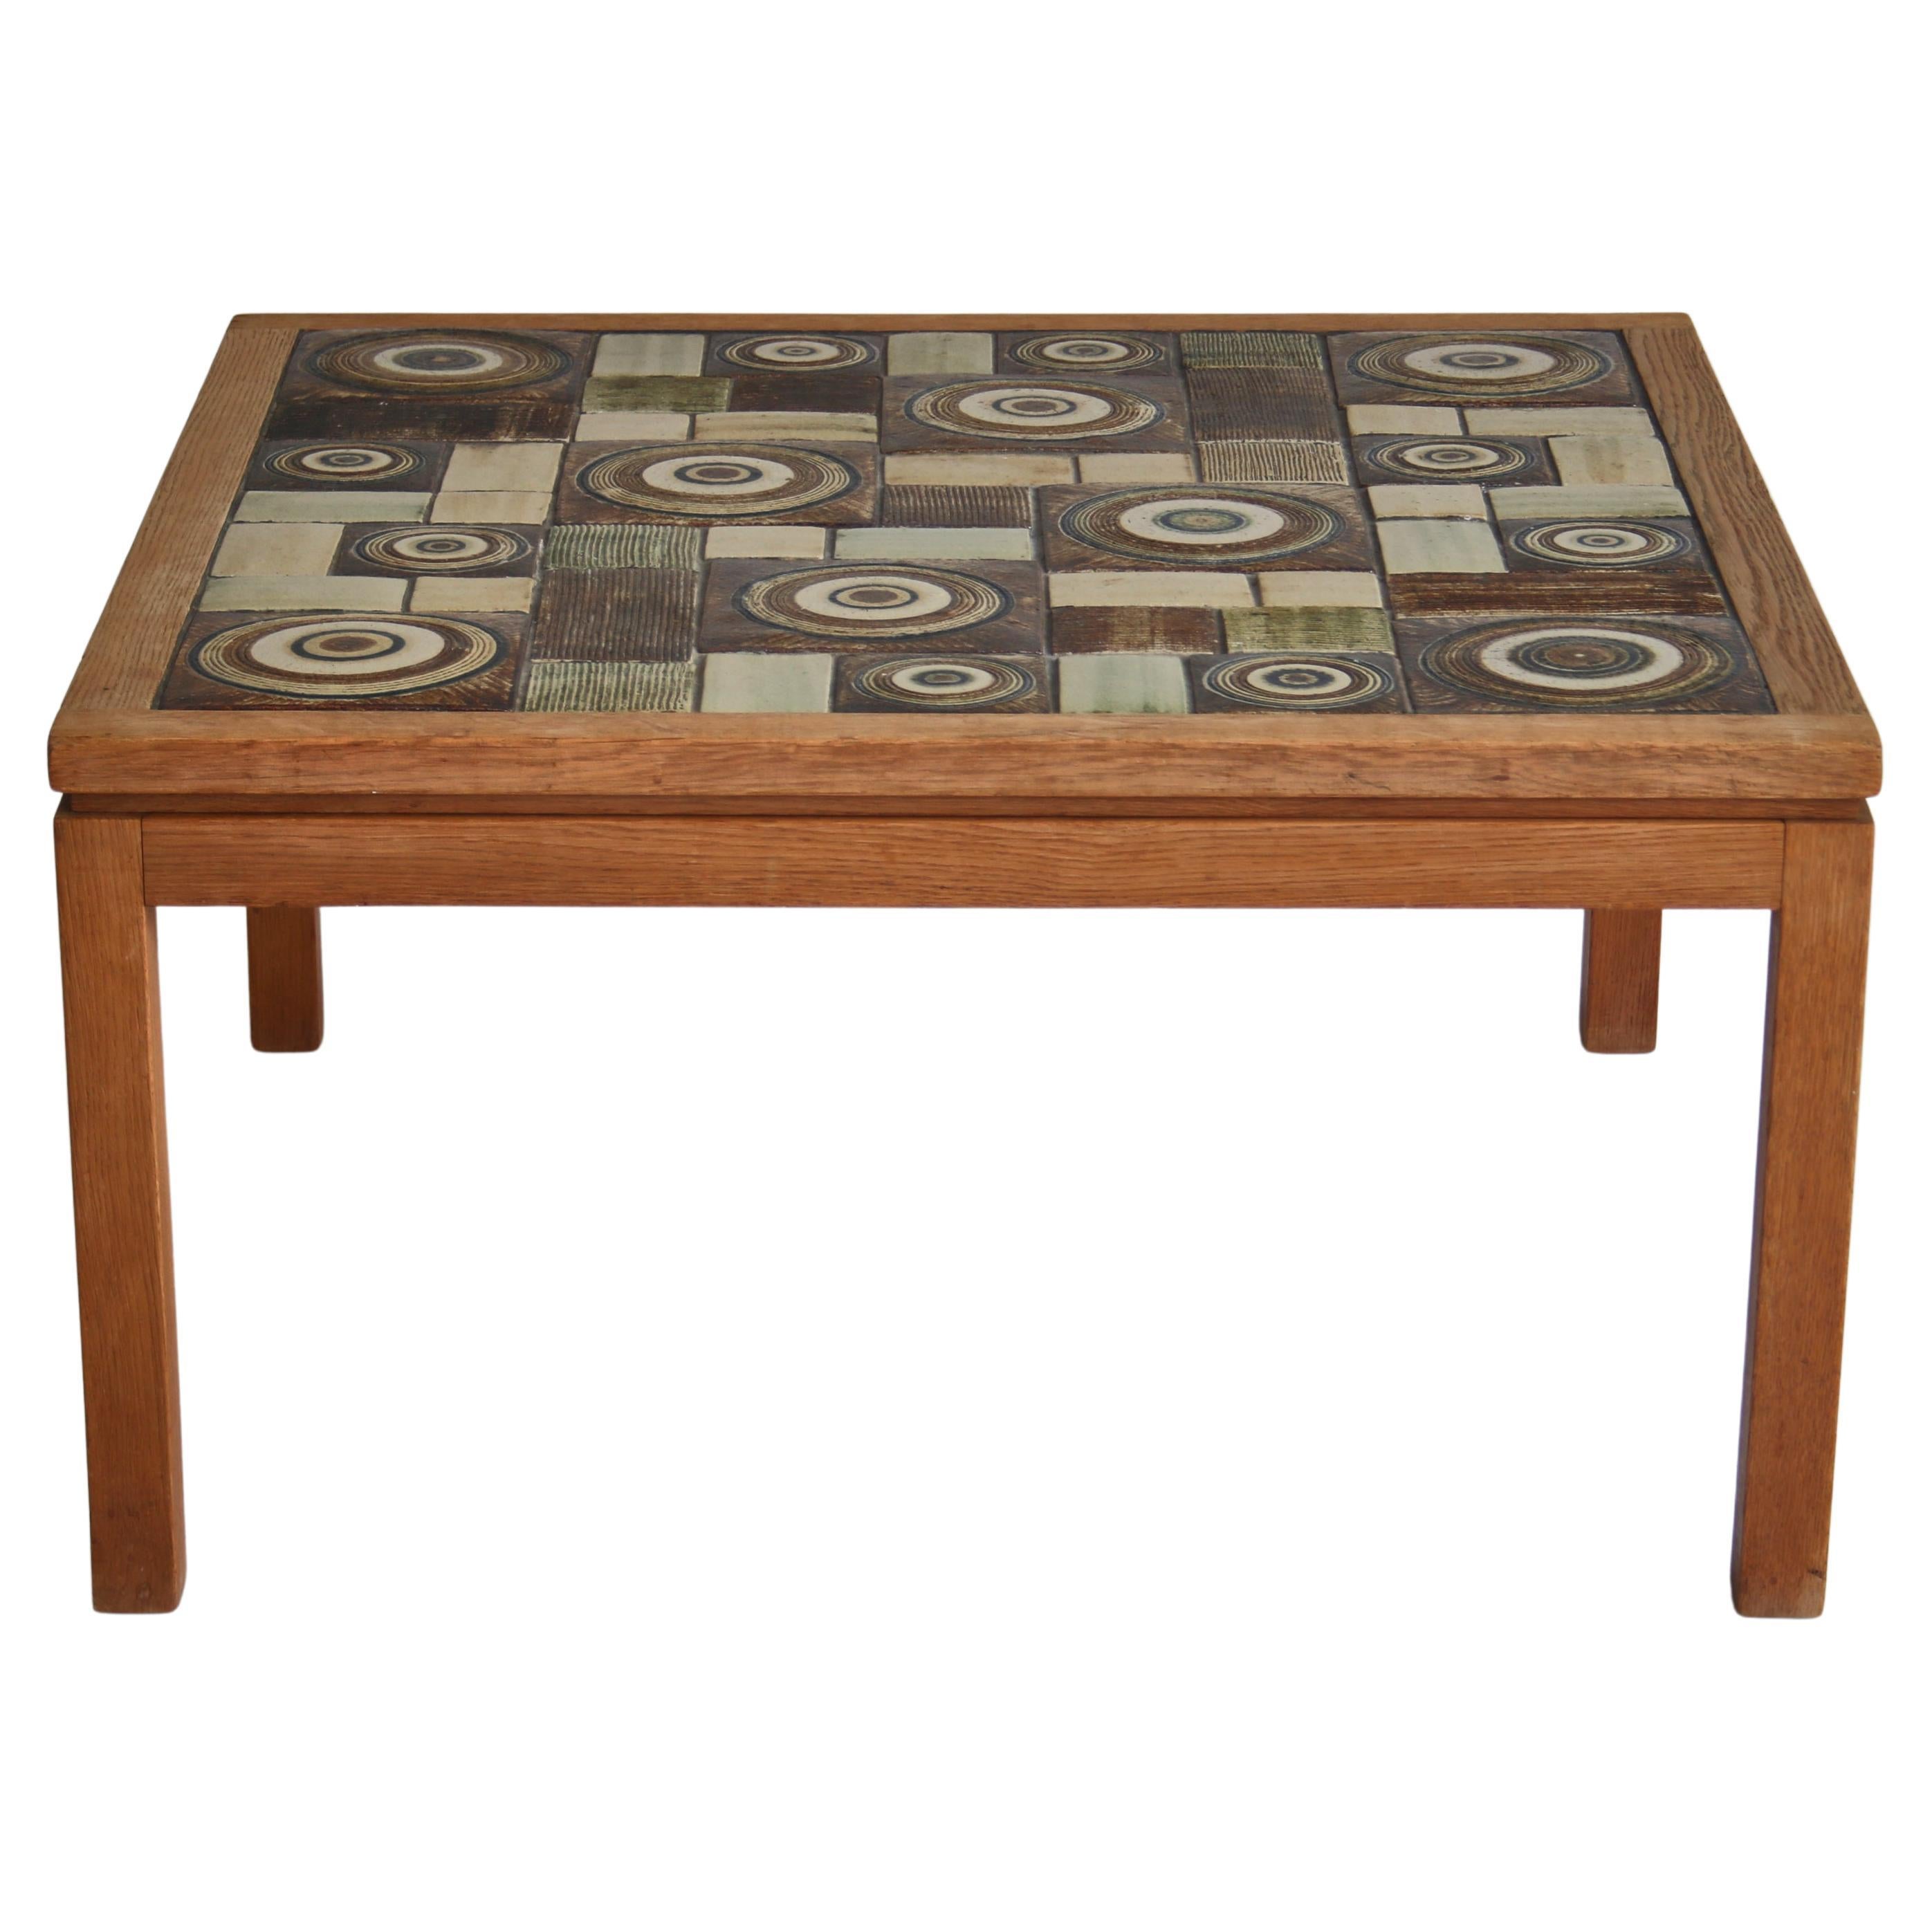 Tue Poulsen Coffee Table in Solid Oak with Ceramic Tiles, Denmark, 1960s